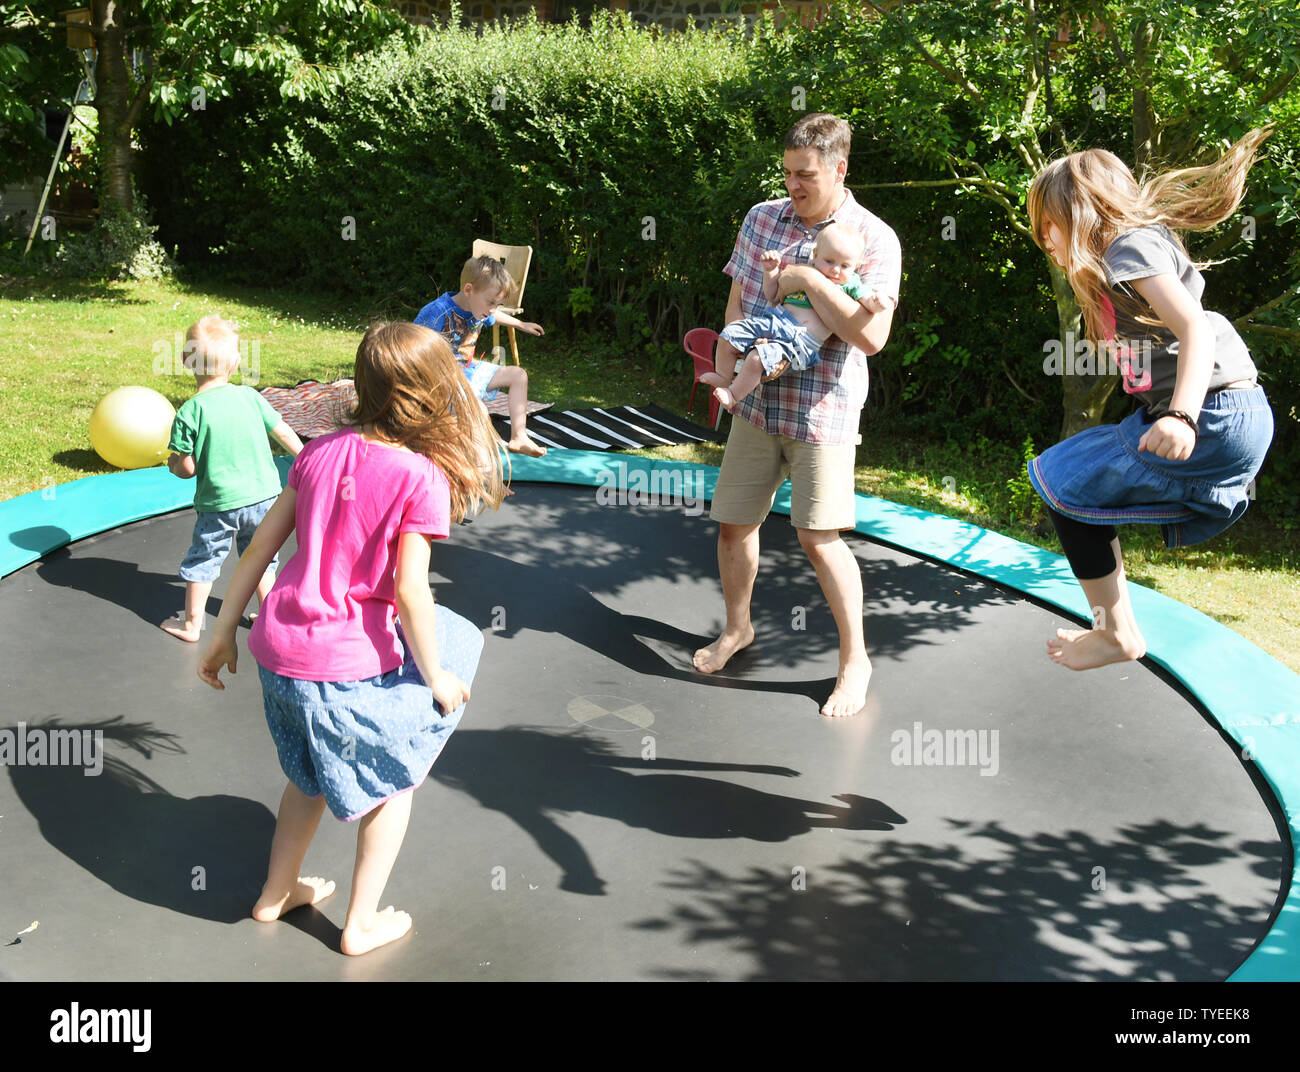 25 June 2019, Saxony, Schönwölkau: Father Stefan Fenchel jumps with five of his six children on the trampoline in the garden. Stefan Fenchel and his Canadian wife Emma moved from Bavaria to Leipzig in 2004 and now live in Schönwölkau with their six children, three girls and three boys between 12 and one year old. In the small village they have built an old house and enjoy the country life with their children. While at school in the neighboring city the German language is of course spoken, the whole family speaks English at home. (to dpa 'Where the children rich in Germany live - and how') Phot Stock Photo